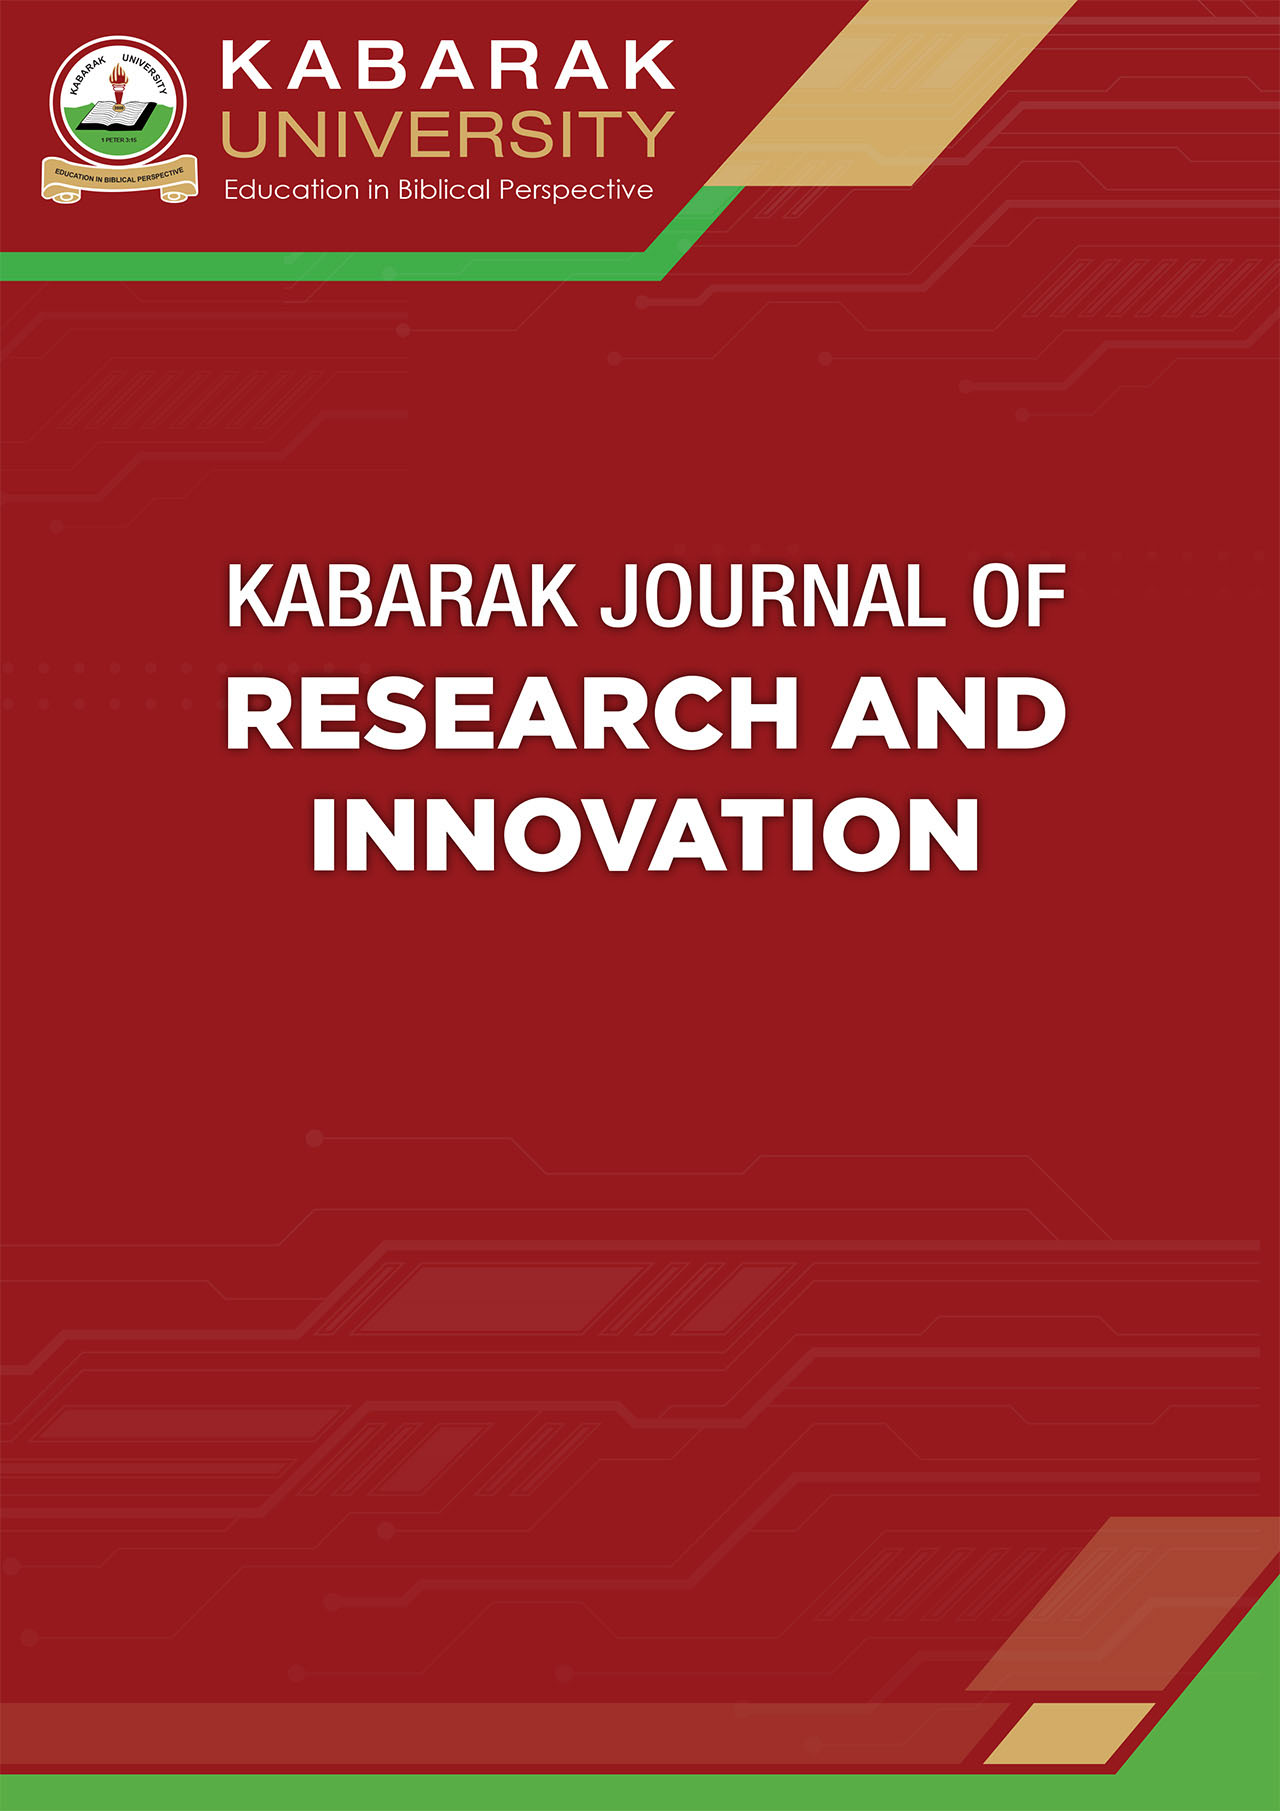 					View Vol. 4 No. 1 (2016): Kabarak Journal of Research and Innovation (KJRI)
				